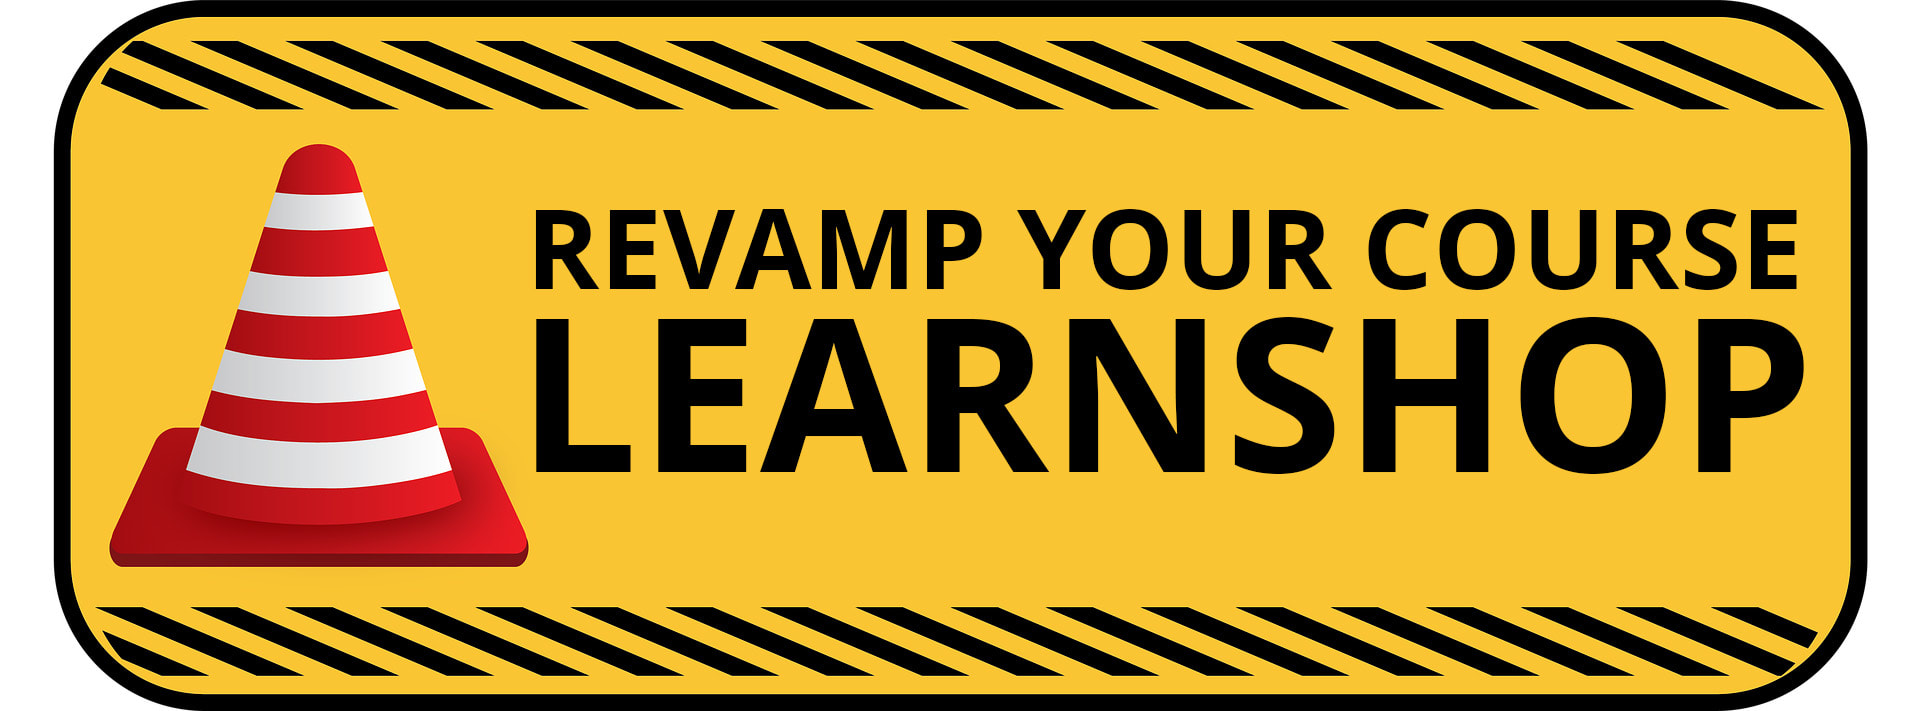 Revamp Your Course Learnshop Banner